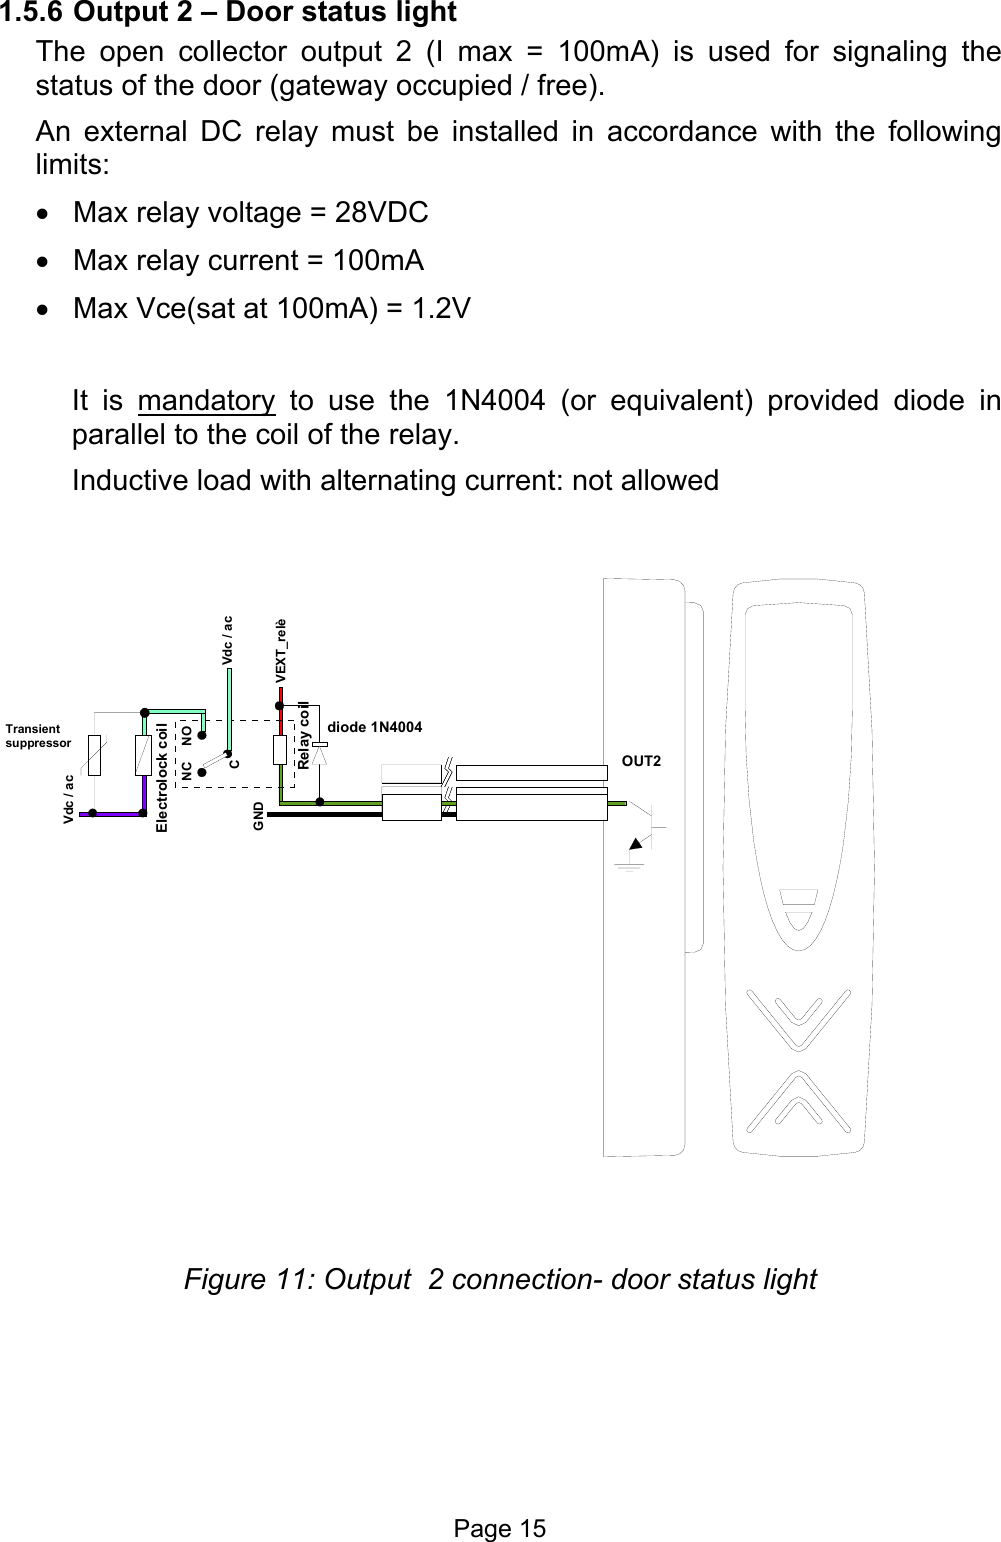  1.5.6 Output 2 – Door status light The open collector output 2 (I max = 100mA) is used for signaling the status of the door (gateway occupied / free). An external DC relay must be installed in accordance with the following limits:  •  Max relay voltage = 28VDC •  Max relay current = 100mA •  Max Vce(sat at 100mA) = 1.2V  It is mandatory to use the 1N4004 (or equivalent) provided diode in parallel to the coil of the relay. Inductive load with alternating current: not allowed VEXT_relèGNDRelay coildiode 1N4004OUT2Transient suppressorVdc / acVdc / acCNC NOElectrolock coil  Figure 11: Output  2 connection- door status light Page 15 